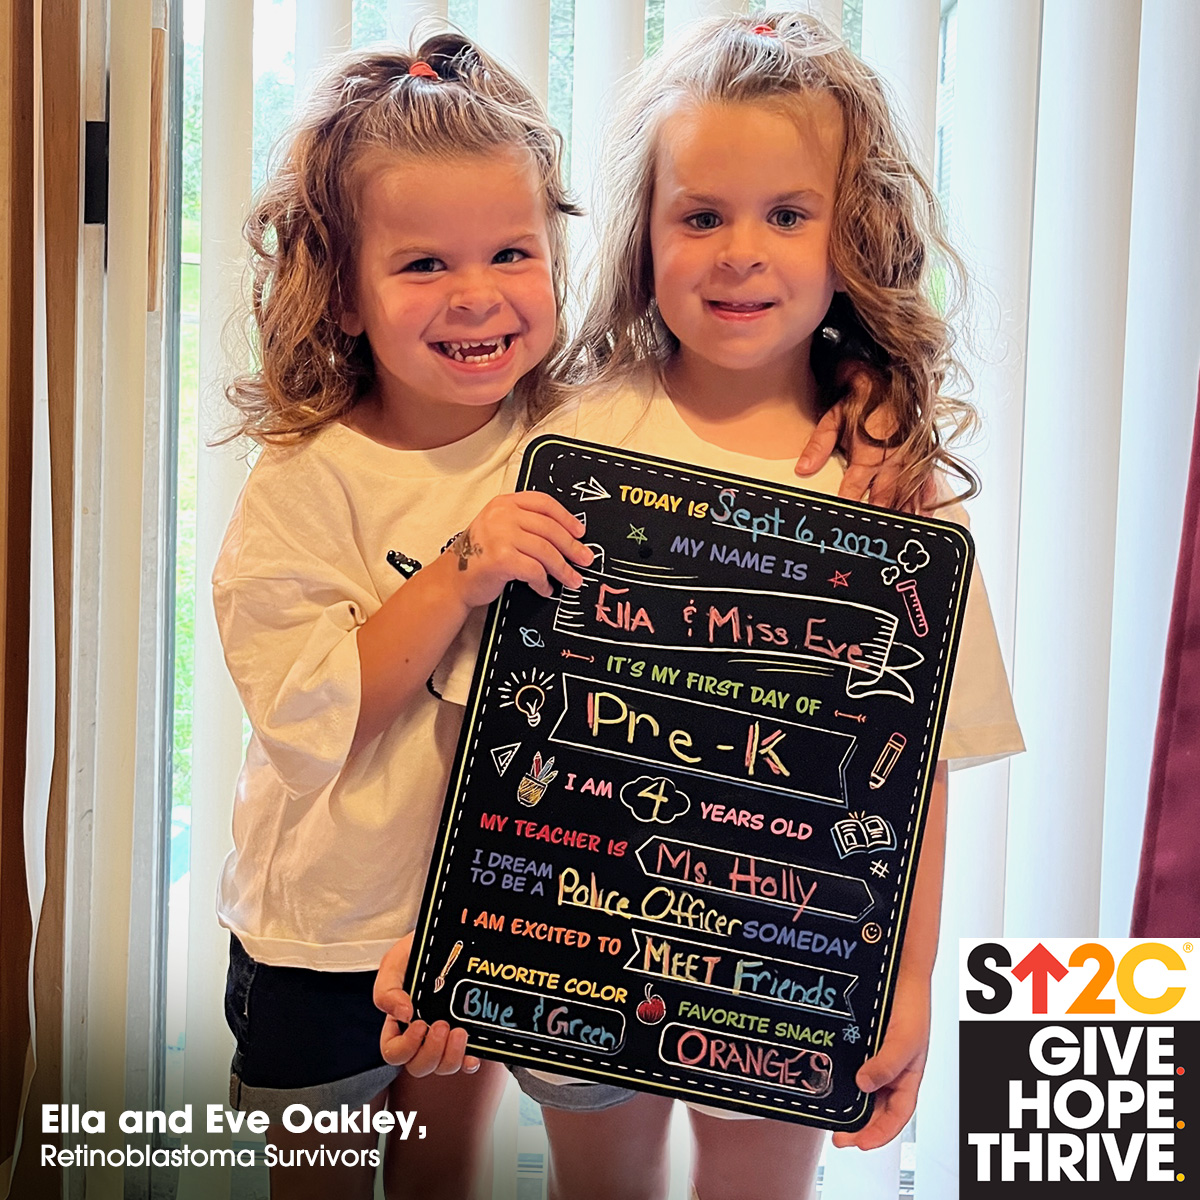 Ella and Eve Oakley are four-year old twin sisters who as infants were diagnosed with #retinoblastoma, a rare eye cancer. Their mother Maryann, herself a cancer survivor, quit her job to become their caregiver. ❤️ #StandUpToCancer